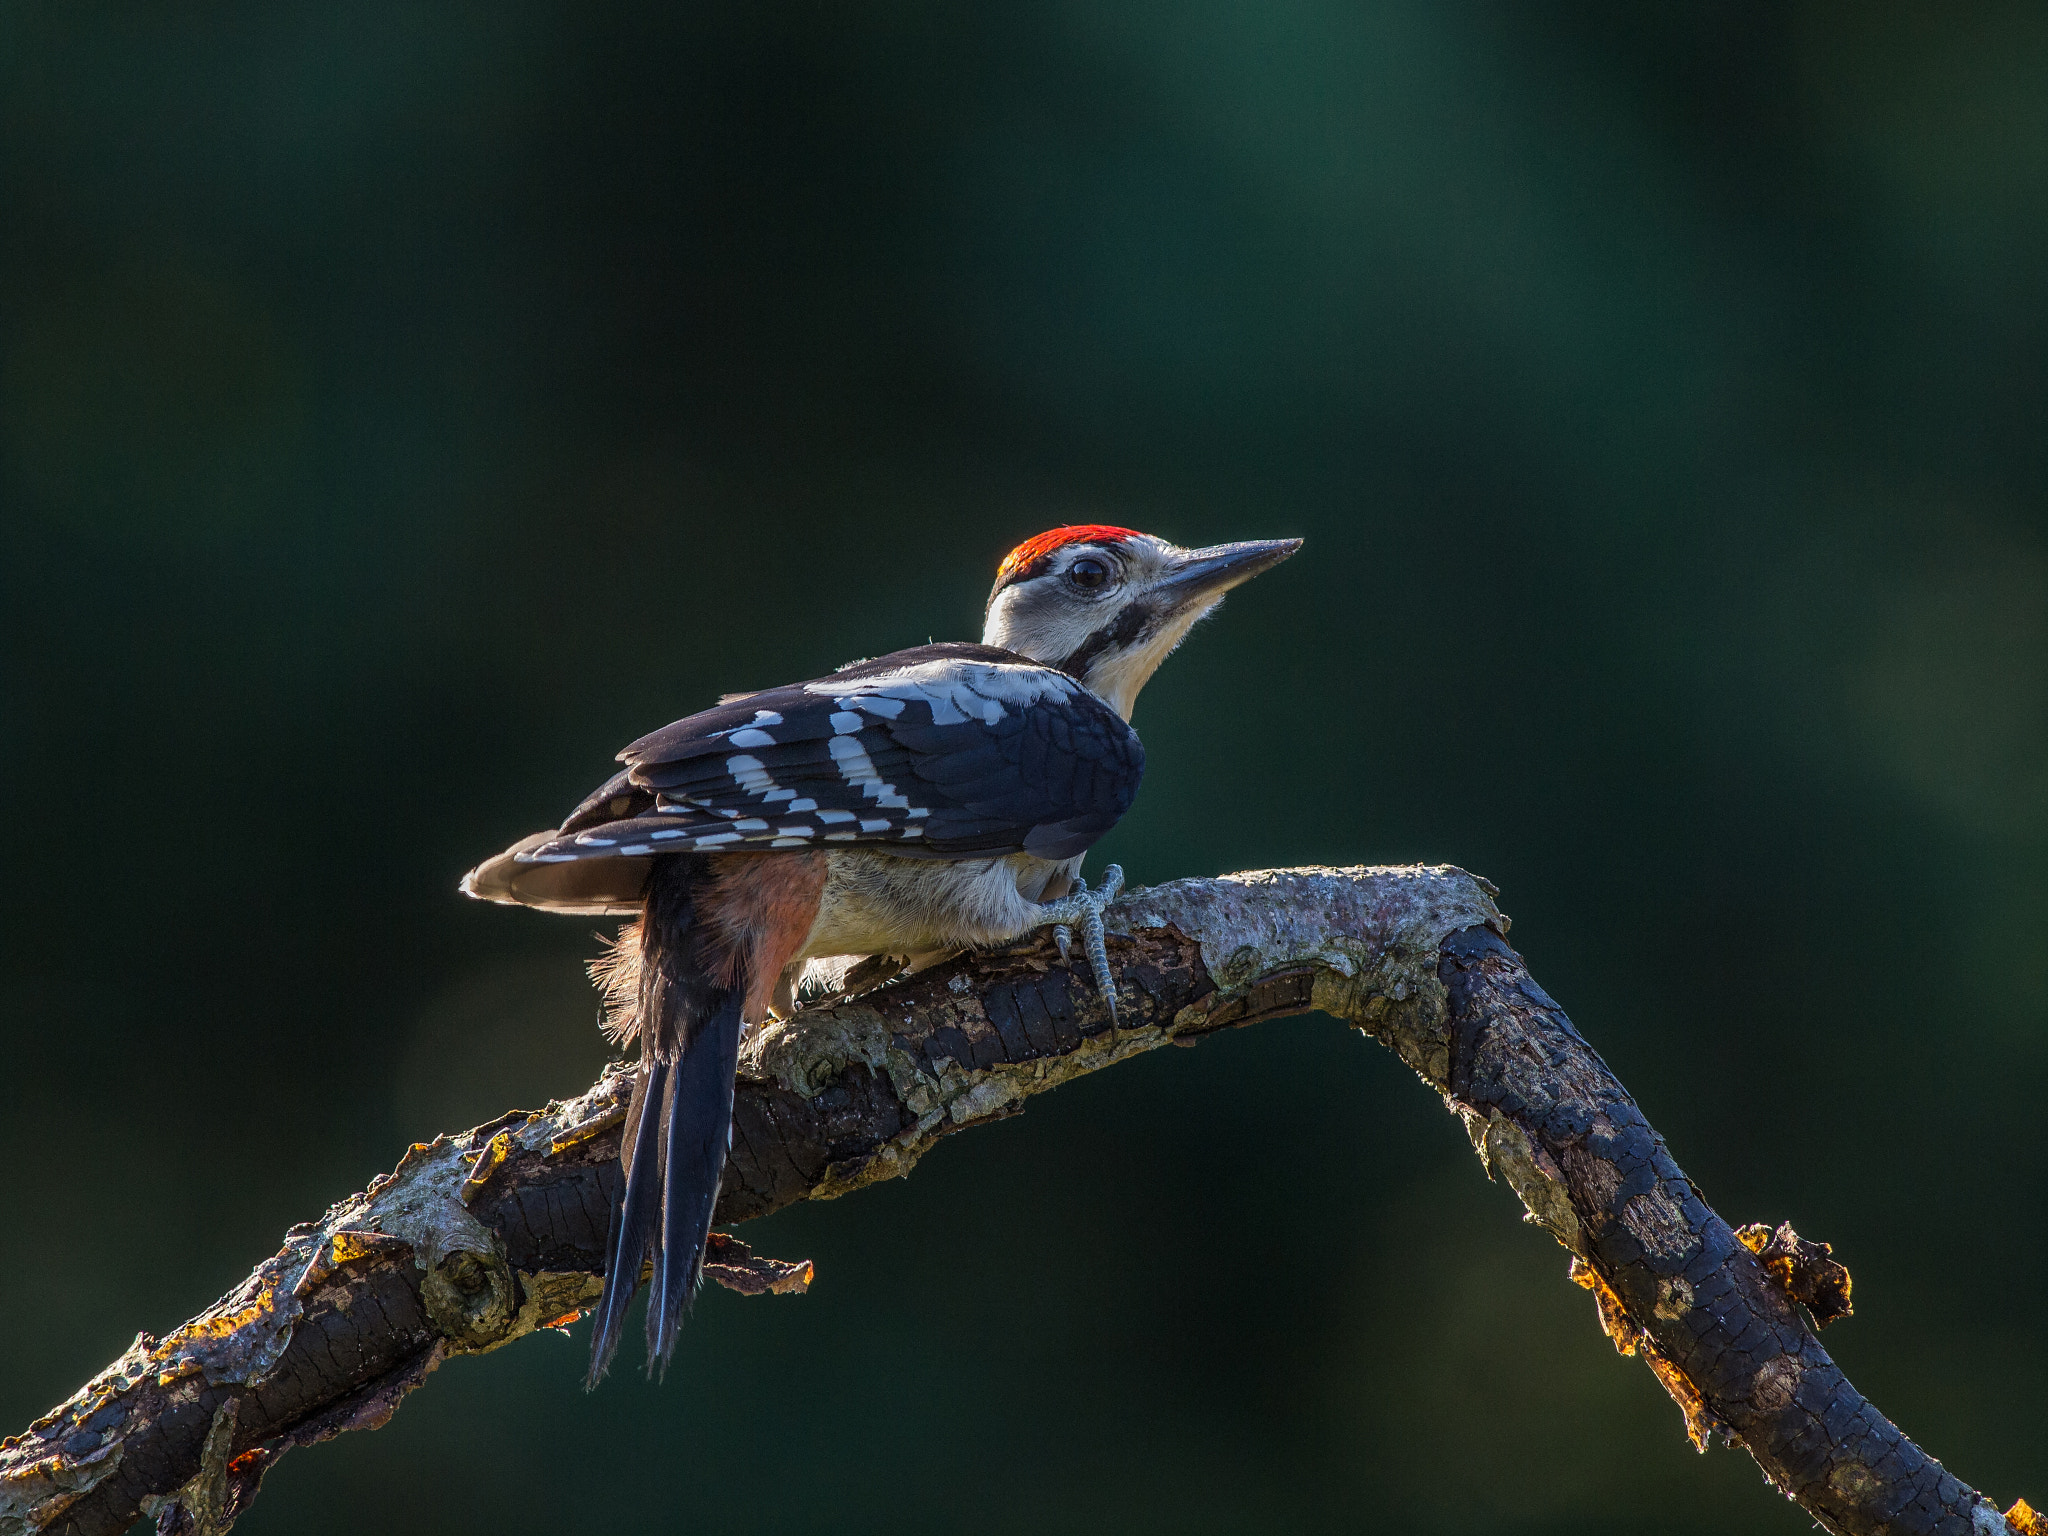 Olympus E-5 sample photo. Great spotted woodpecker photography